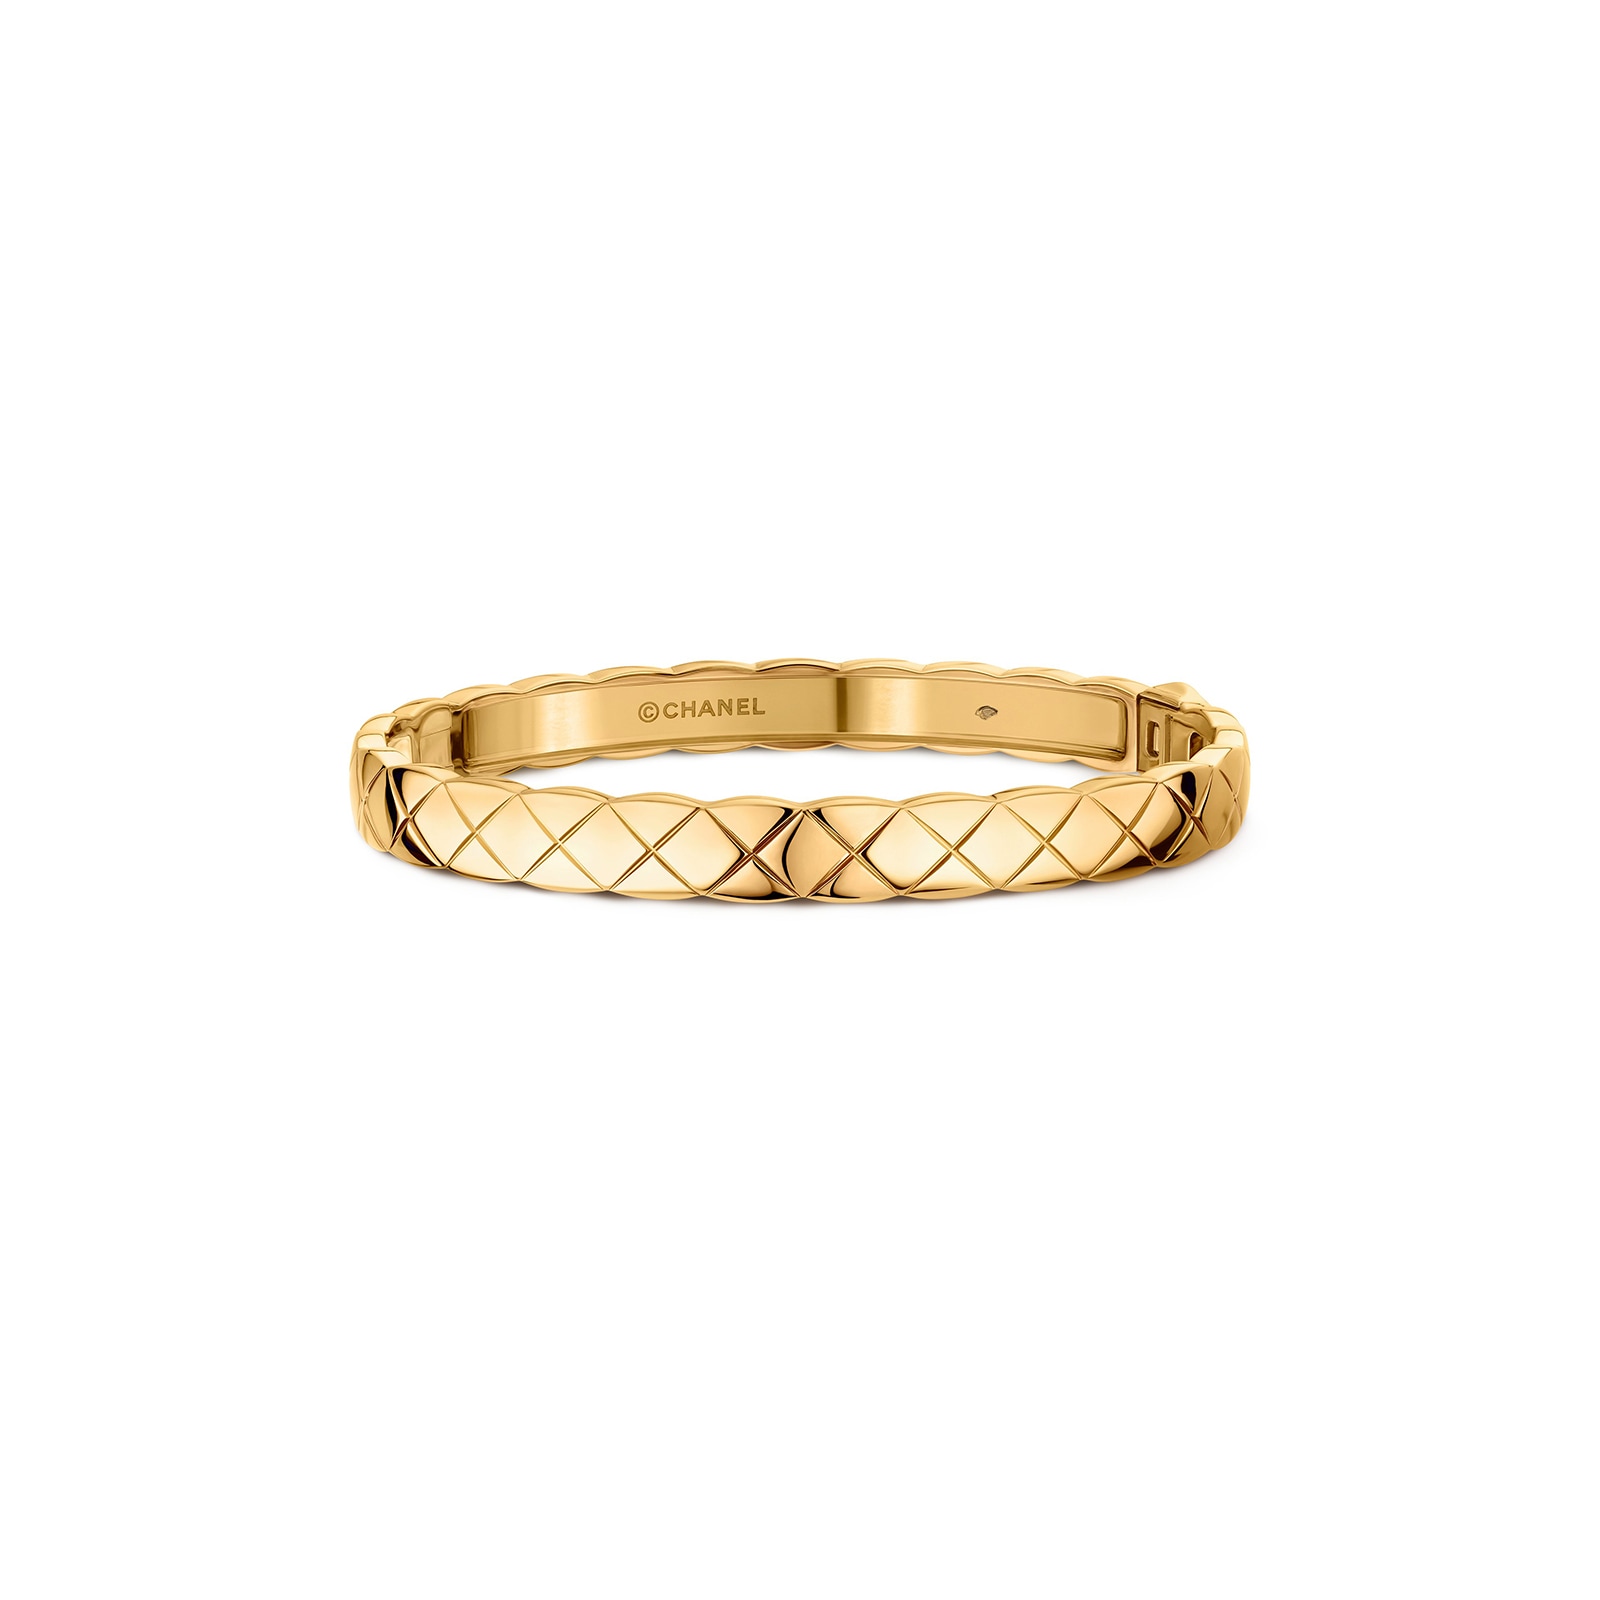 Chanel bracelet Chanel Gold in Gold plated - 30118334